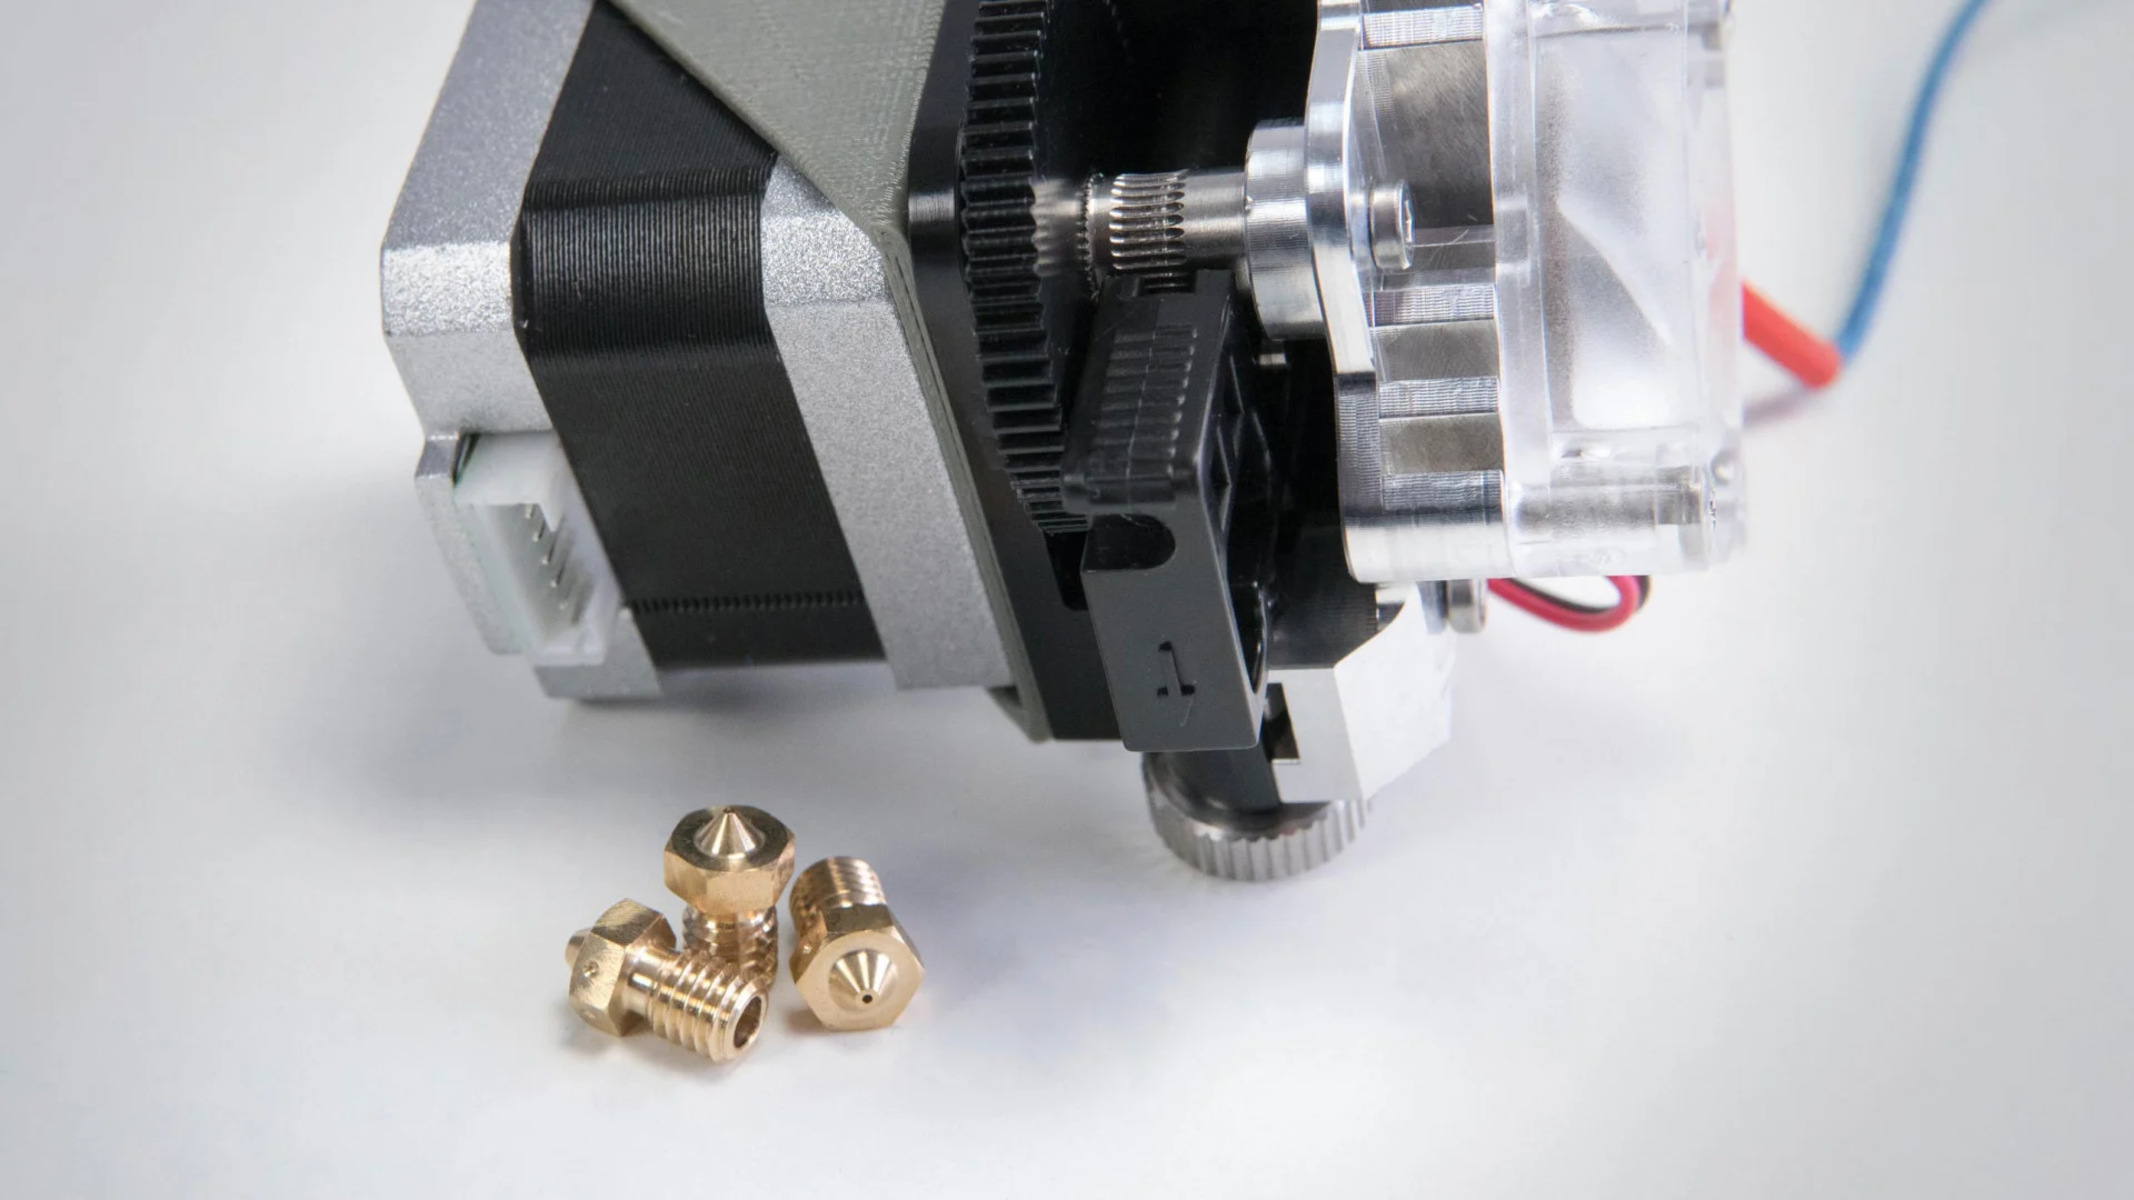 What Is An Extruder In 3D Printing